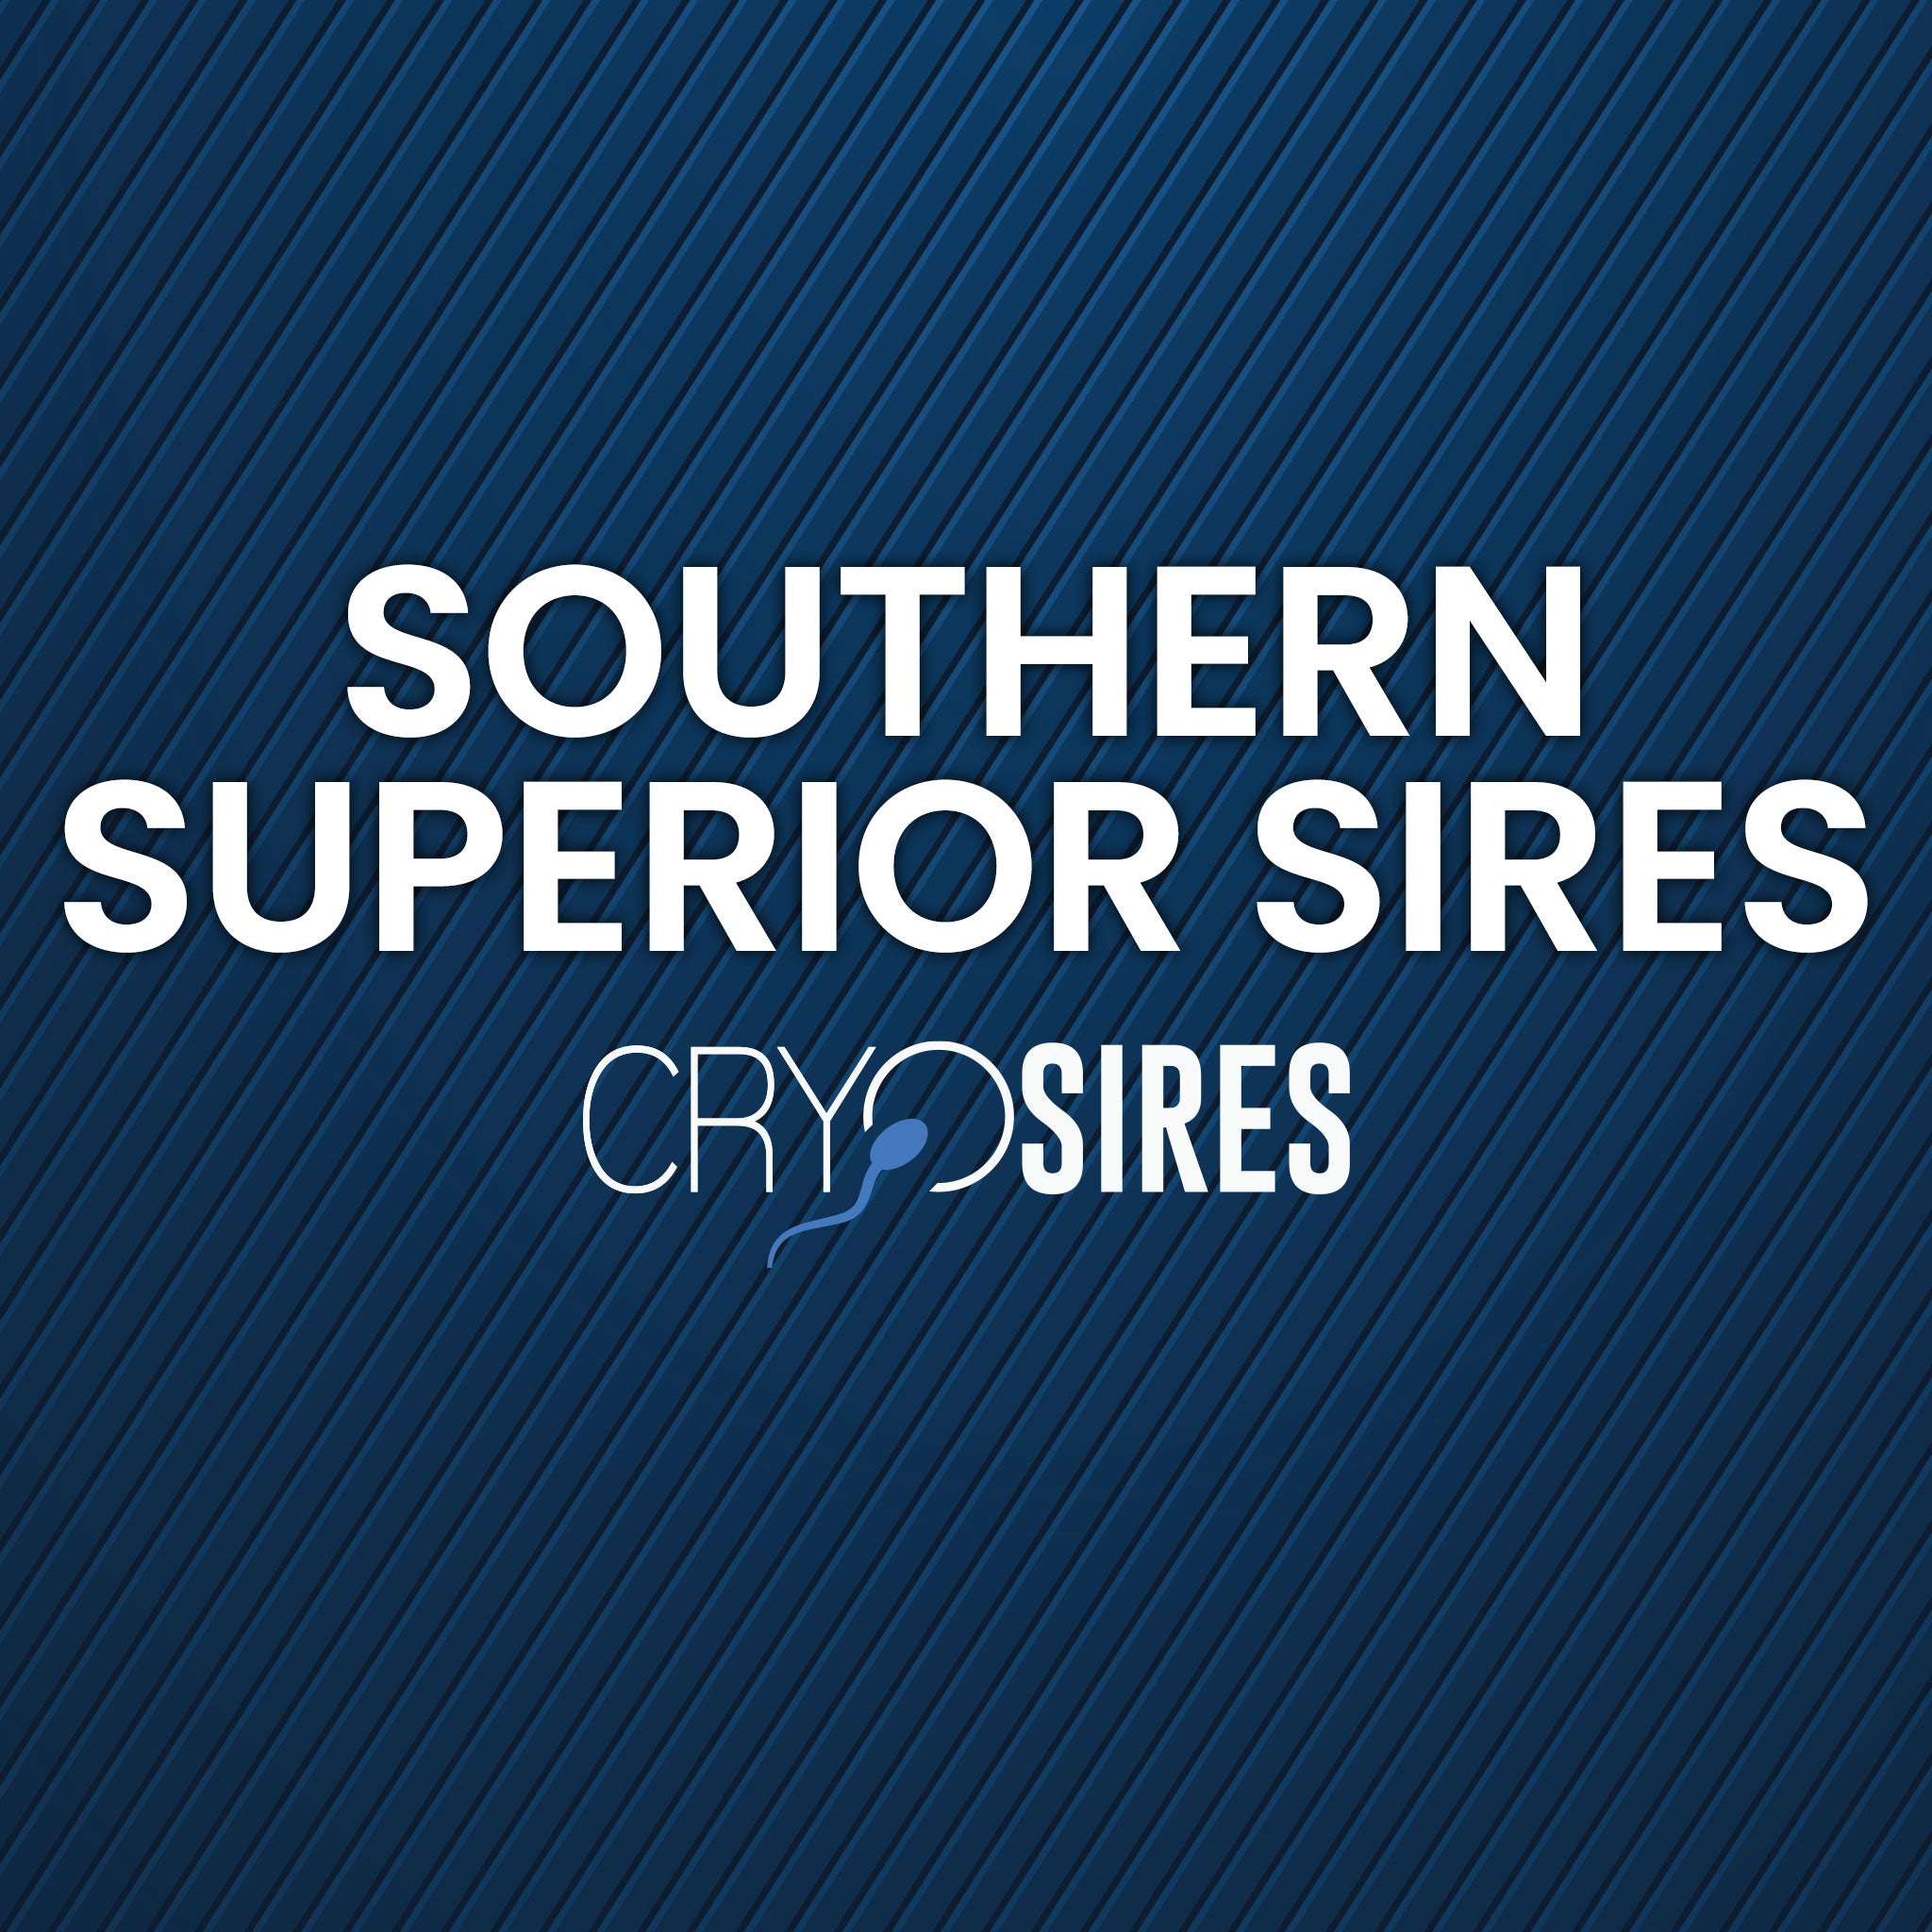 Southern Superior Sires